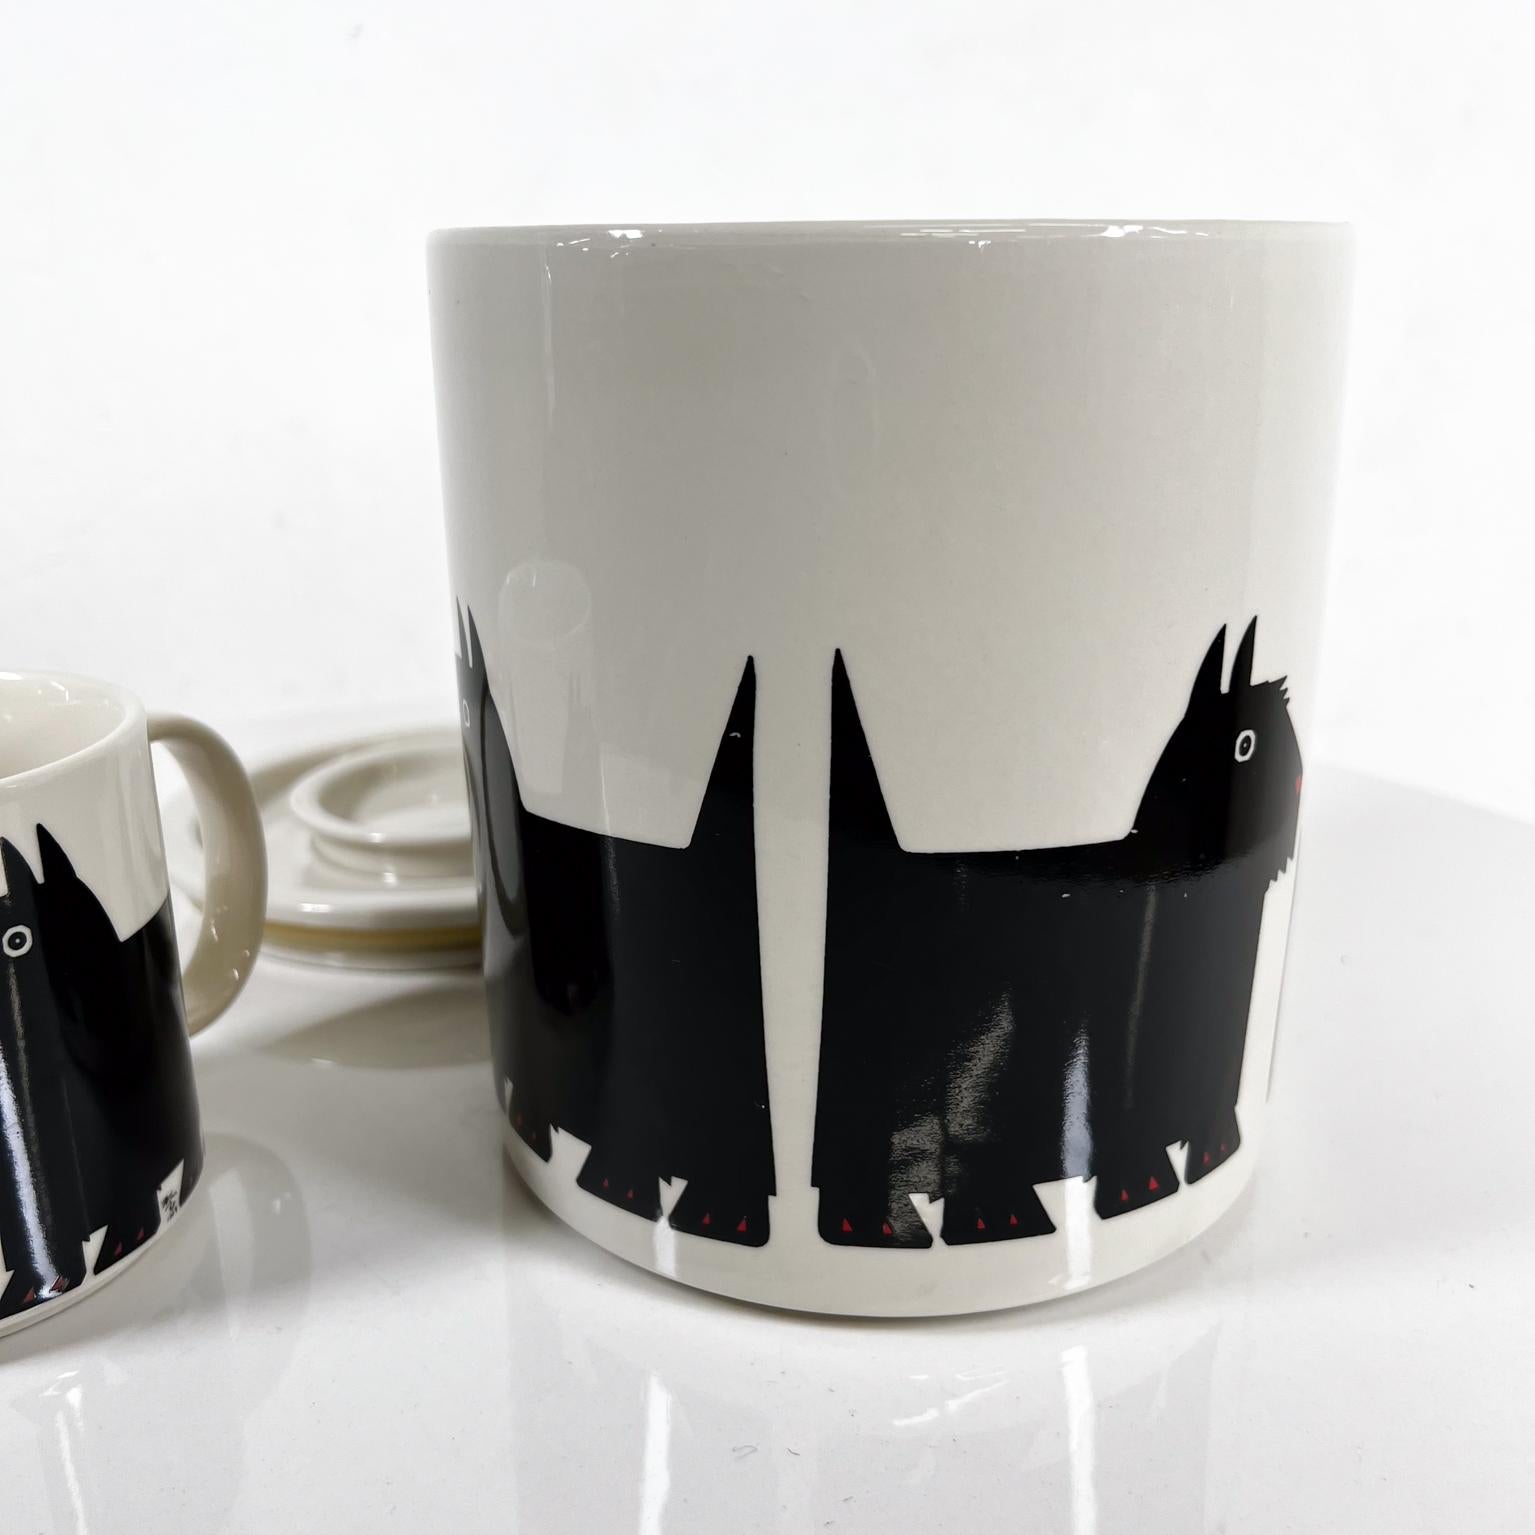 1984 Scottish Terrier Cookie Jar and Scottie Mug by Taylor and NG
Stamped San Francisco, CA
Made in Japan
Cup 4.63 d x 3.38 w x 3.5 h
Jar 6 diameter x 7 h
Preowned vintage condition
See all images.